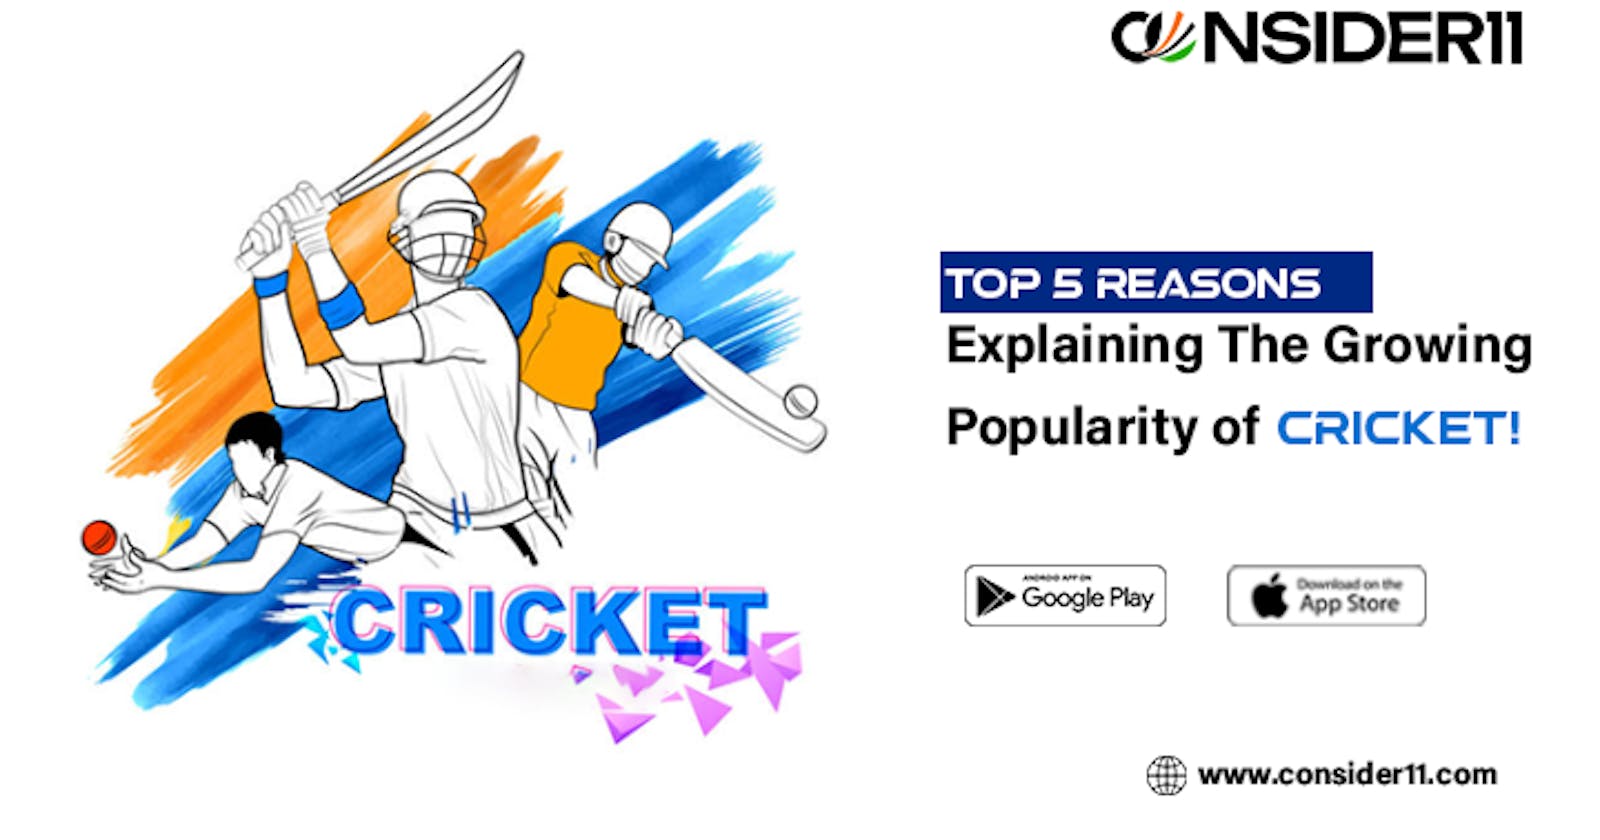 Top 5 Reasons Explaining The Growing Popularity of Cricket!